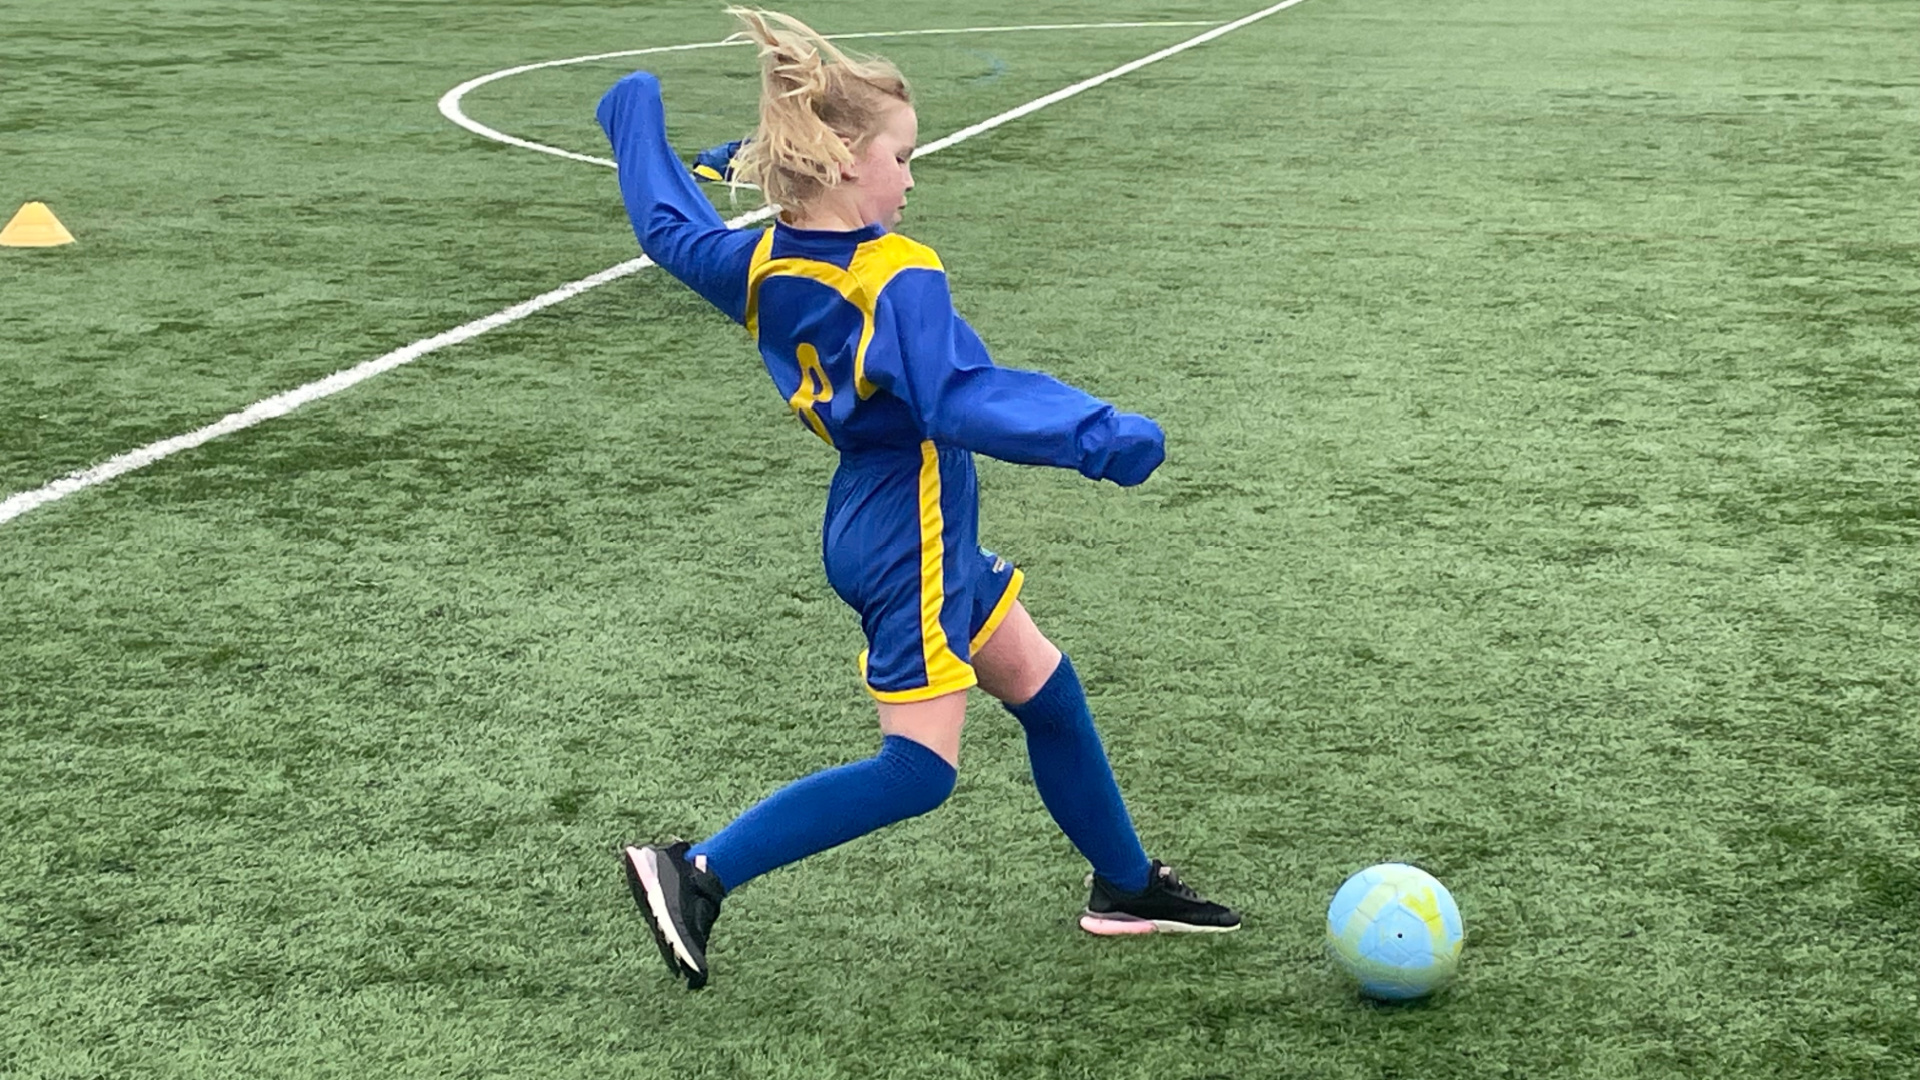 Young girls enjoyed a fun-packed morning of football training.